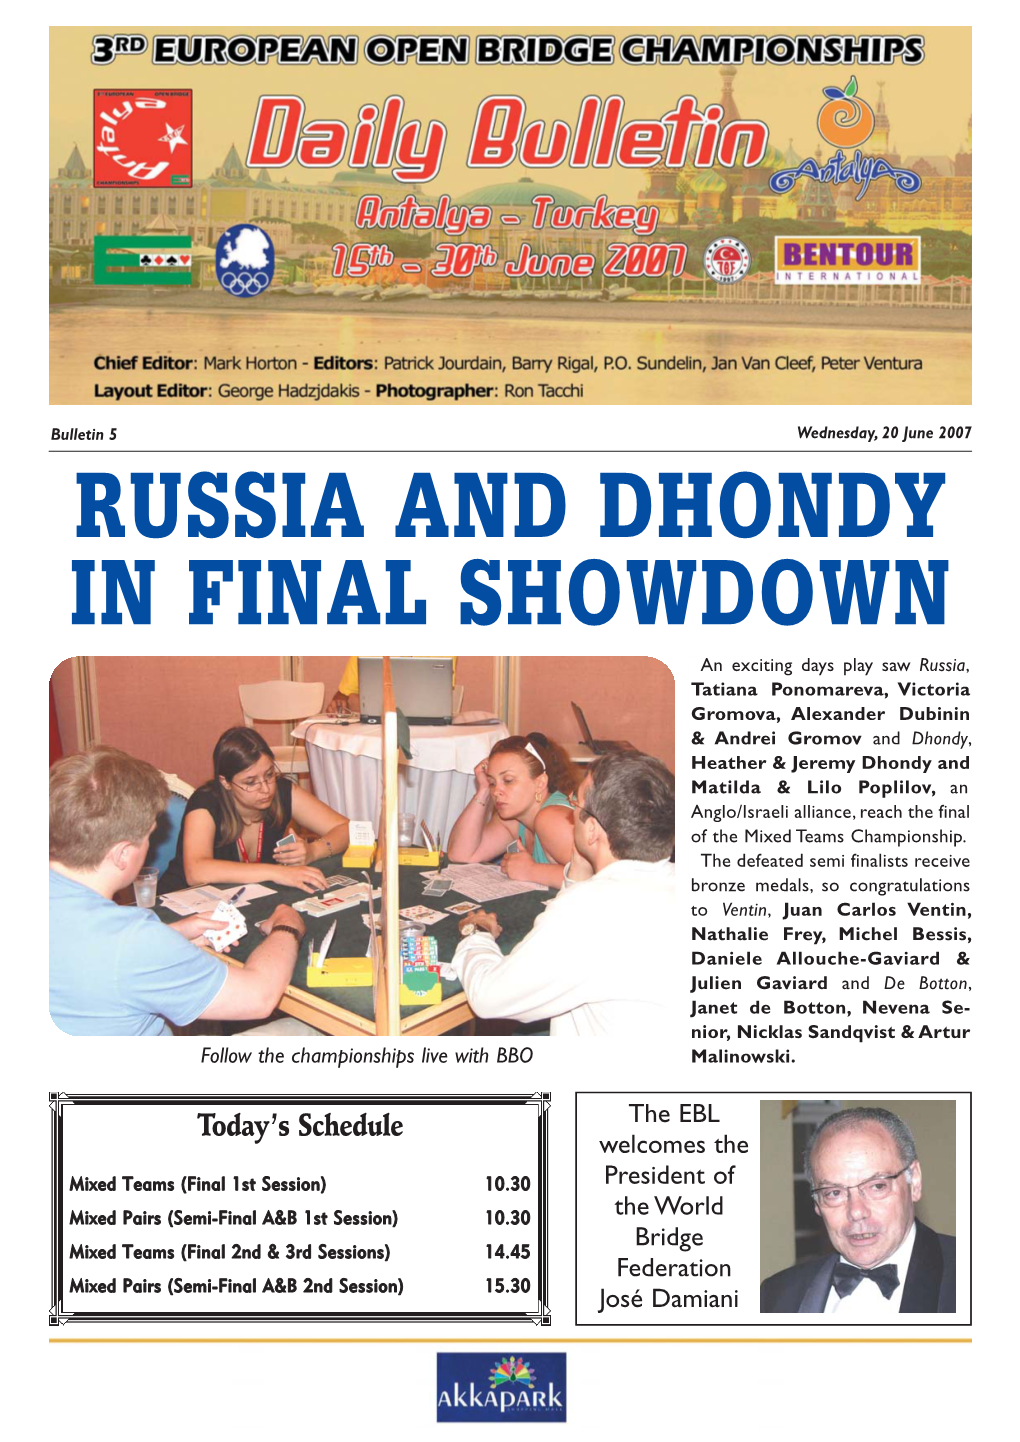 Russia and Dhondy in Final Showdown